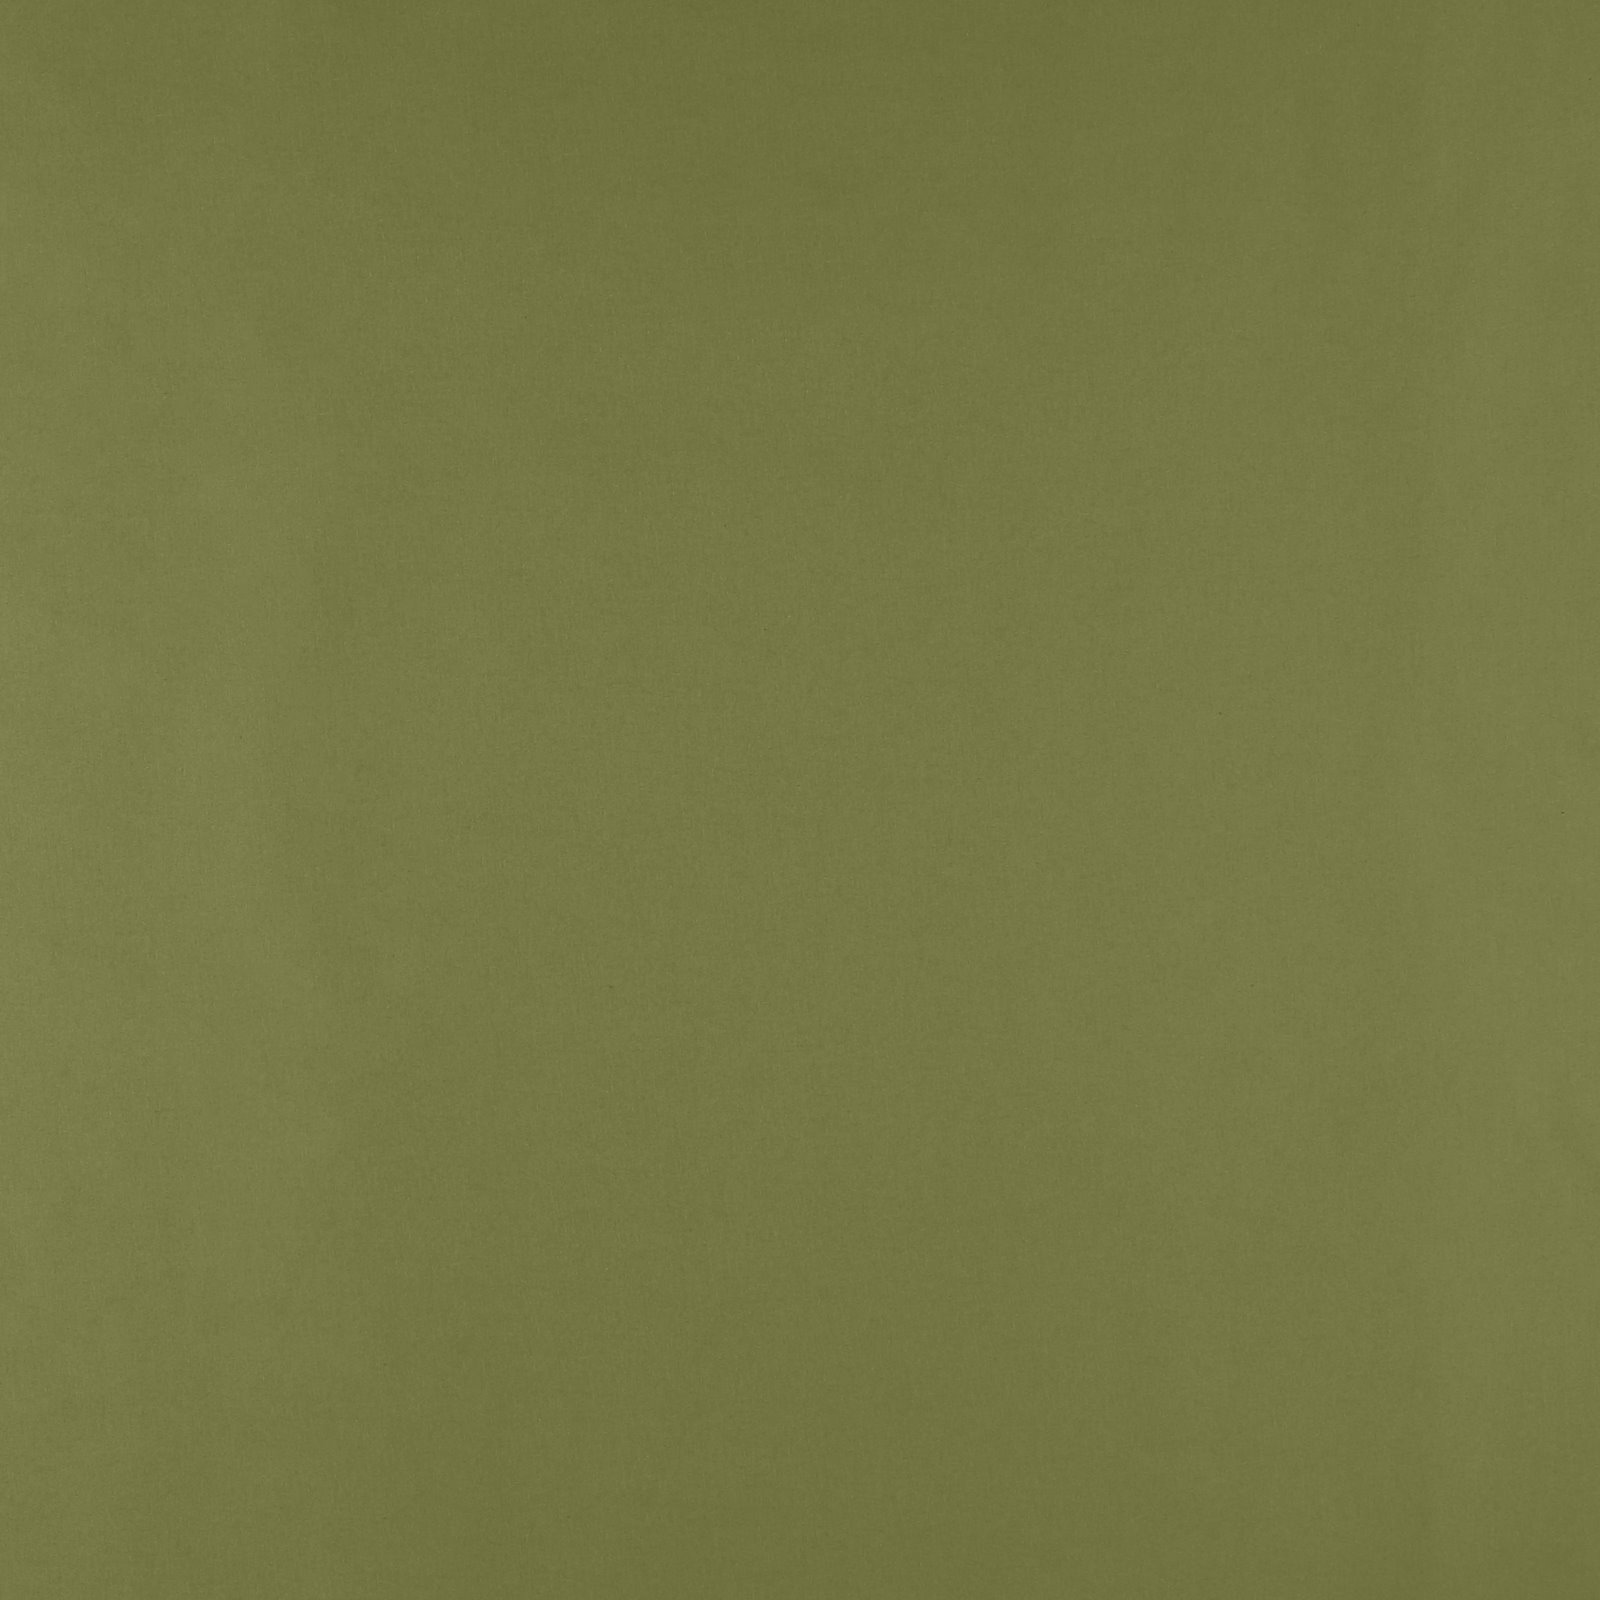 Organic cotton antique green 780515_pack_solid